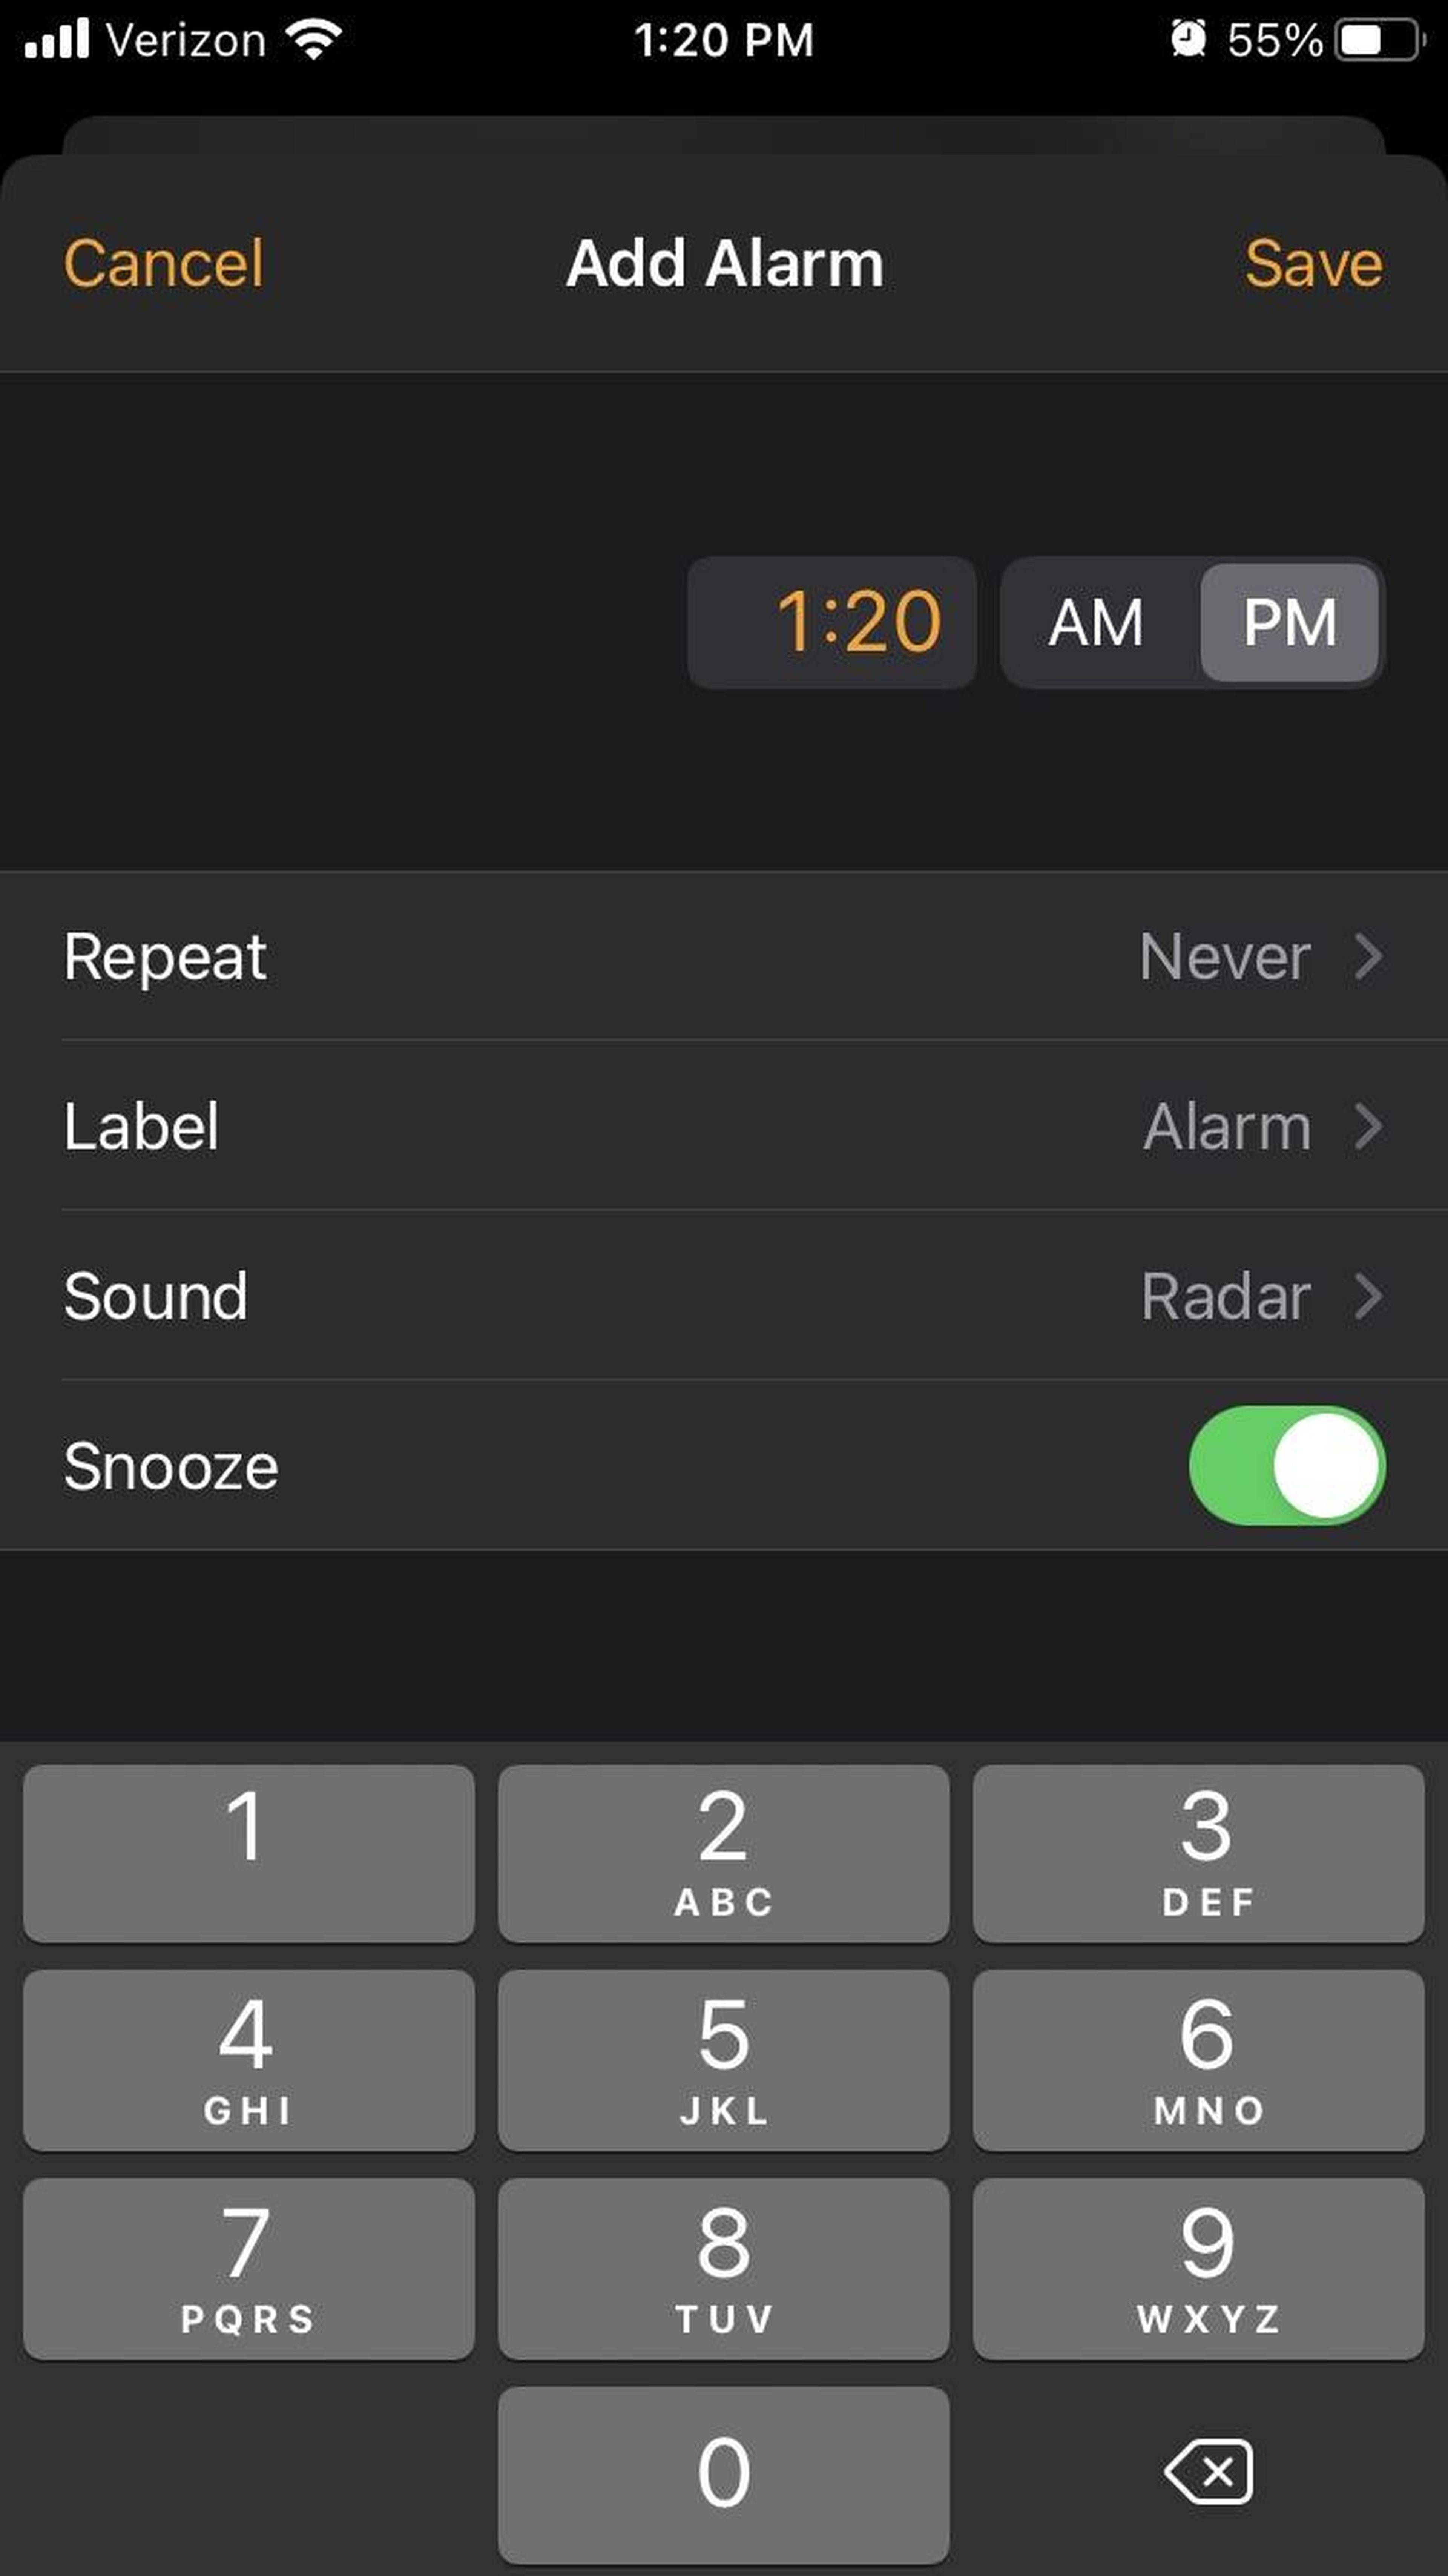 It's much easier to set alarms.